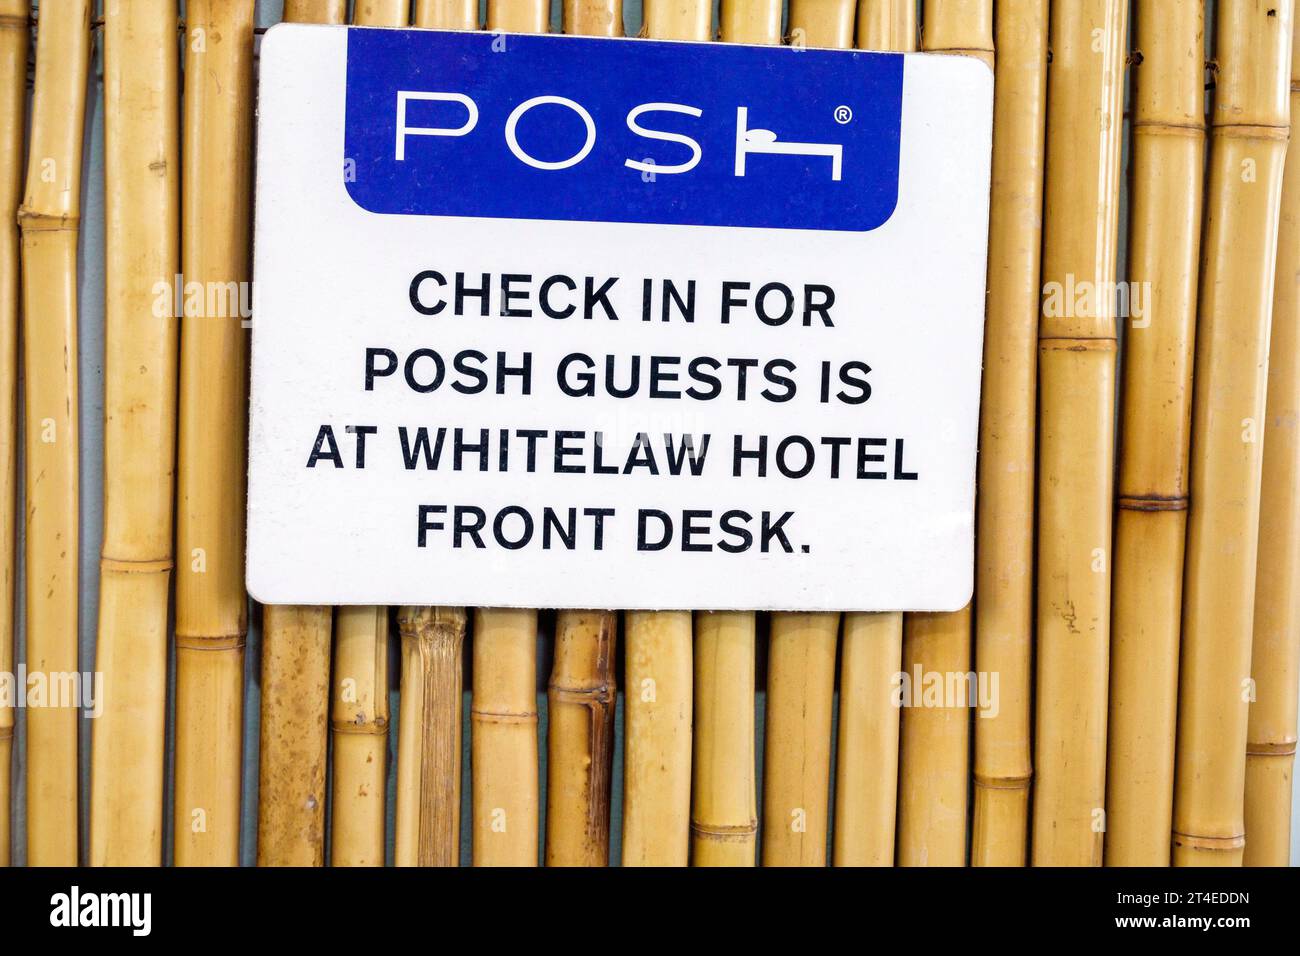 Miami Beach Florida,outside exterior,building front entrance hostel,Collins Avenue,Posh South Beach Hostel sign check in,hotels motels businesses Stock Photo